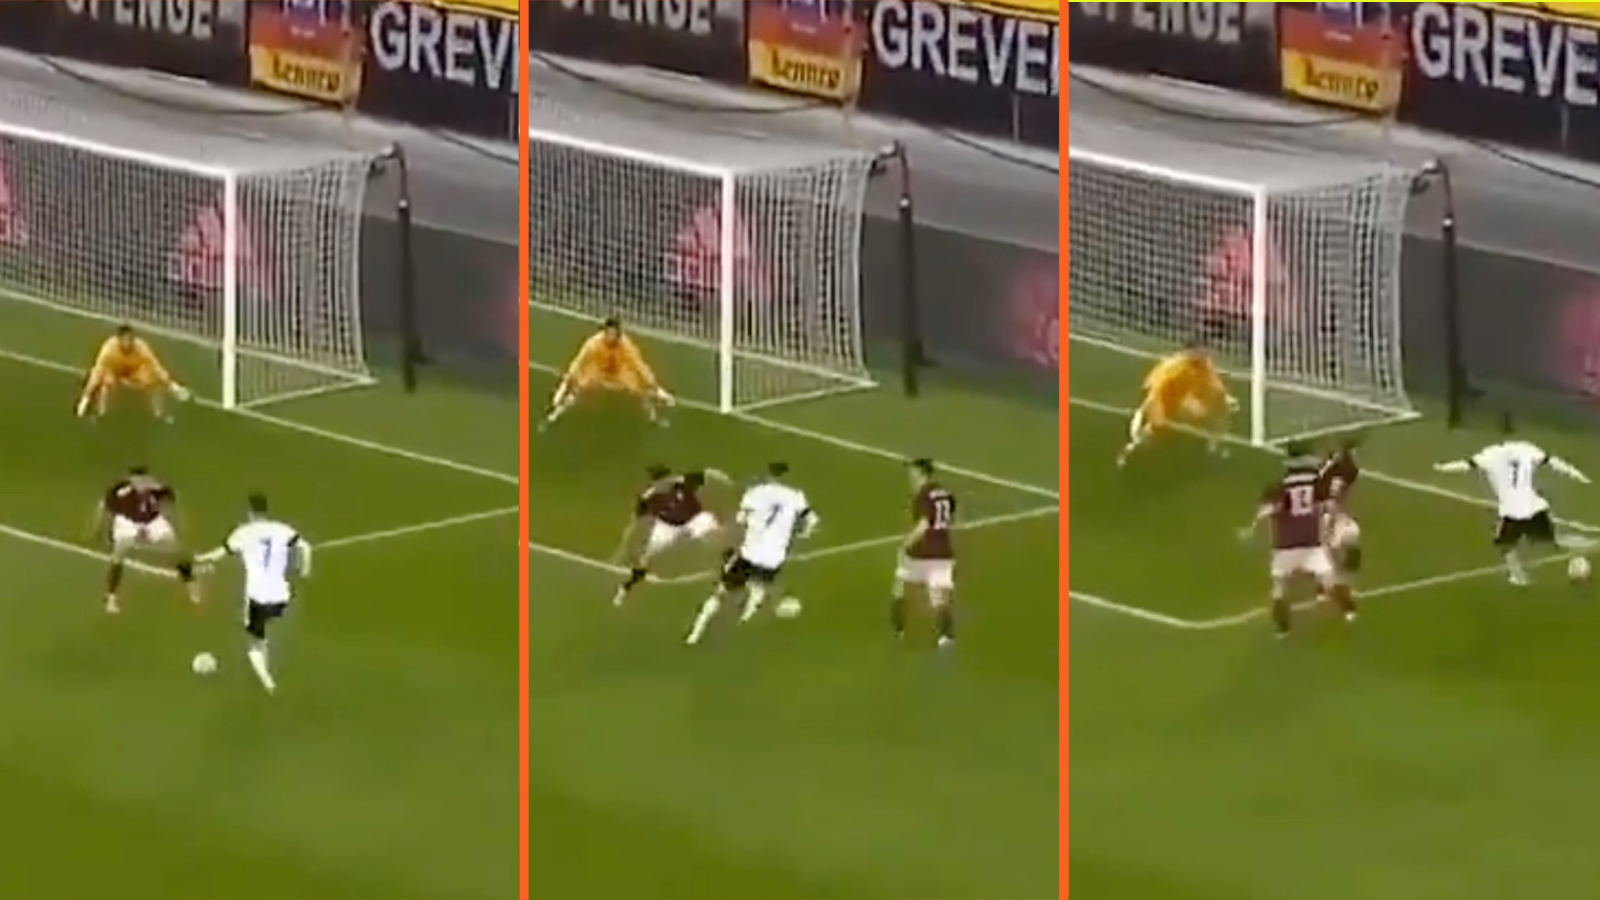 Video: Kai Havertz forces own goal with clever dribble and shot against Latvia